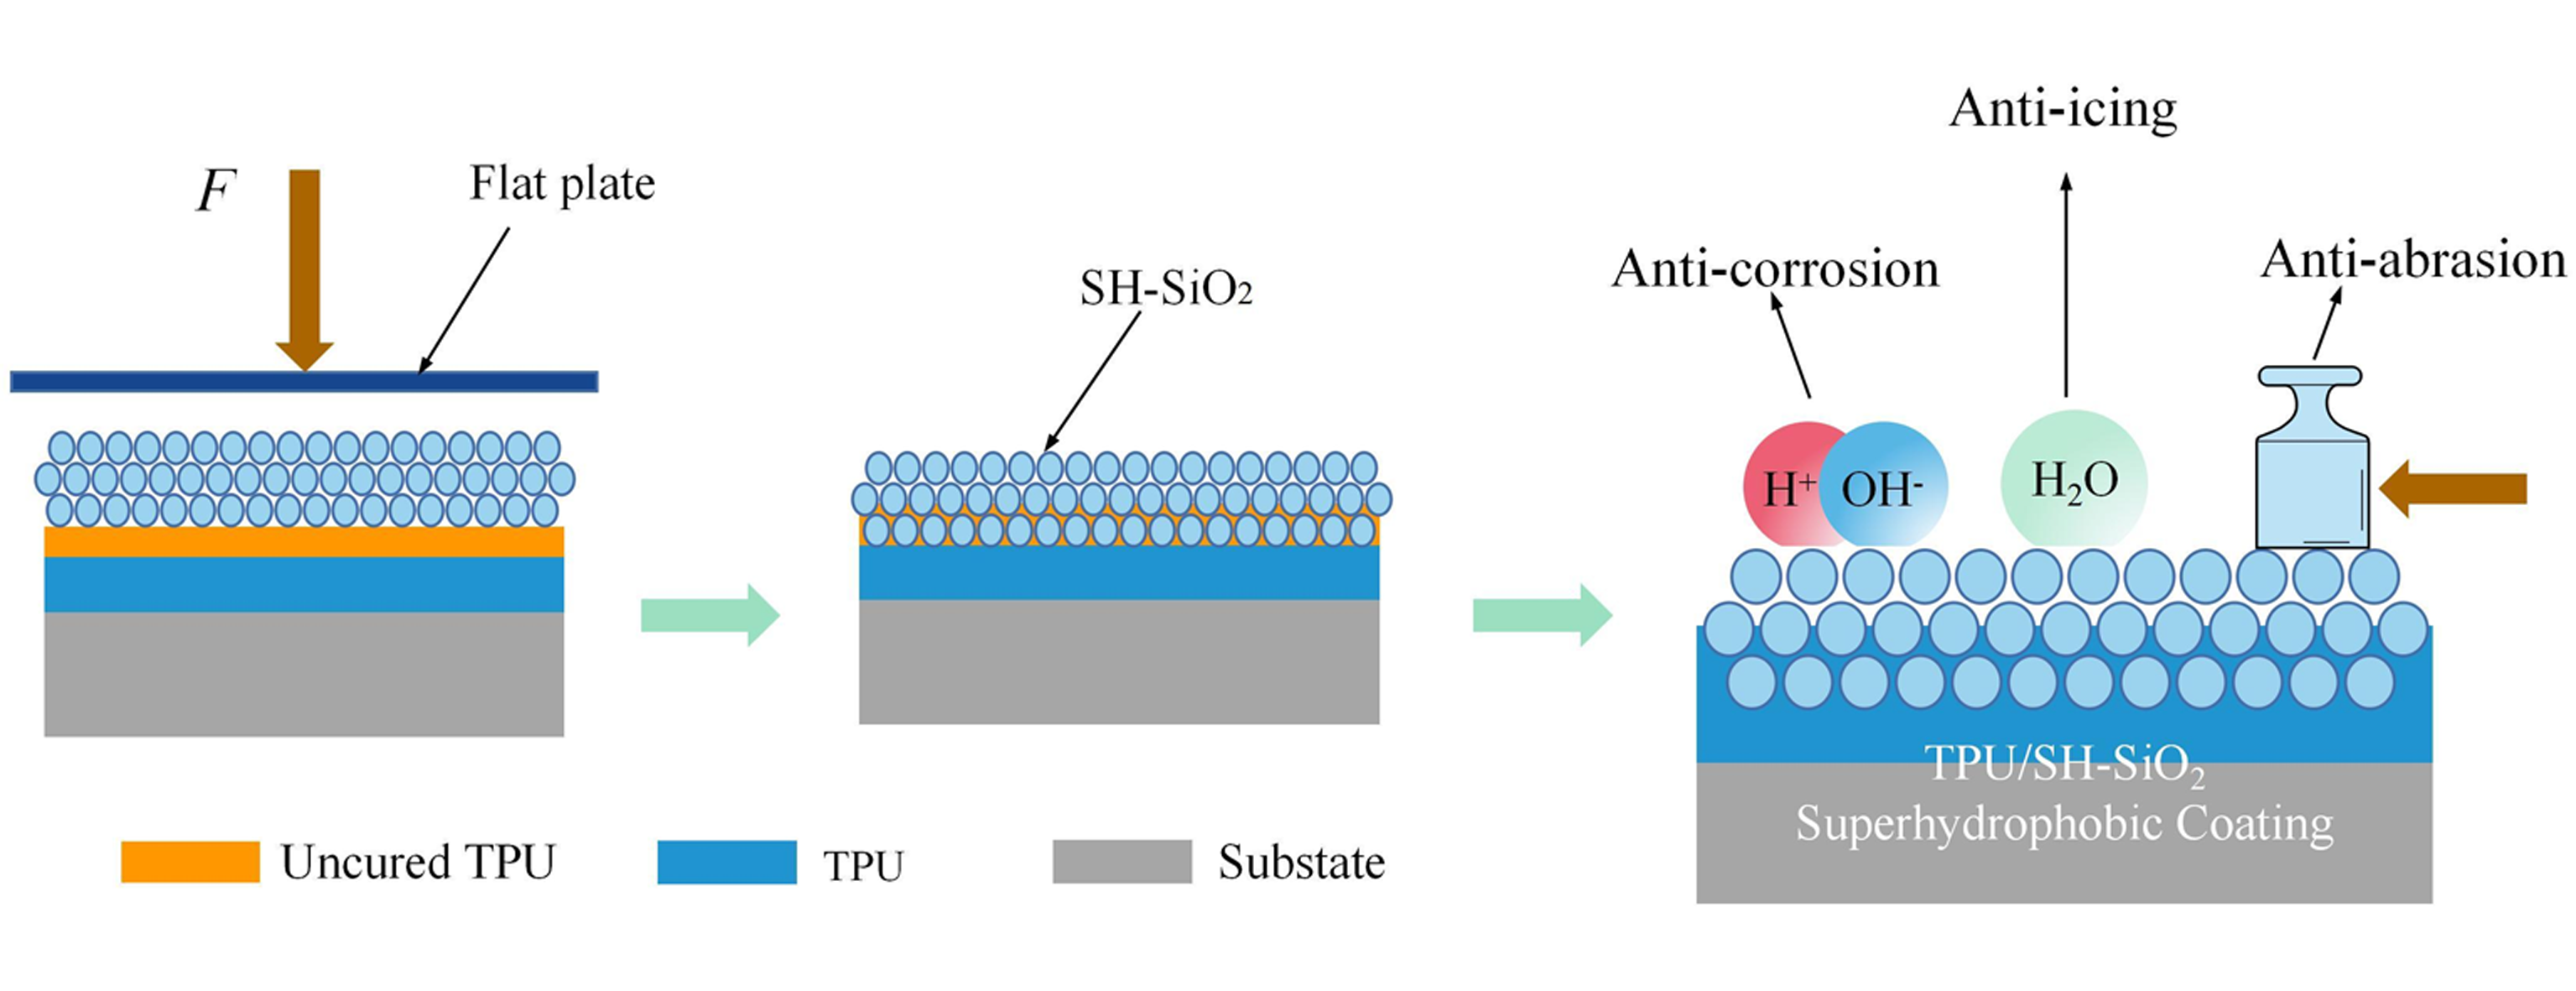 An Abrasion Resistant TPU/SH-SiO<sub>2</sub> Superhydrophobic Coating for Anti-Icing and Anti-Corrosion Applications